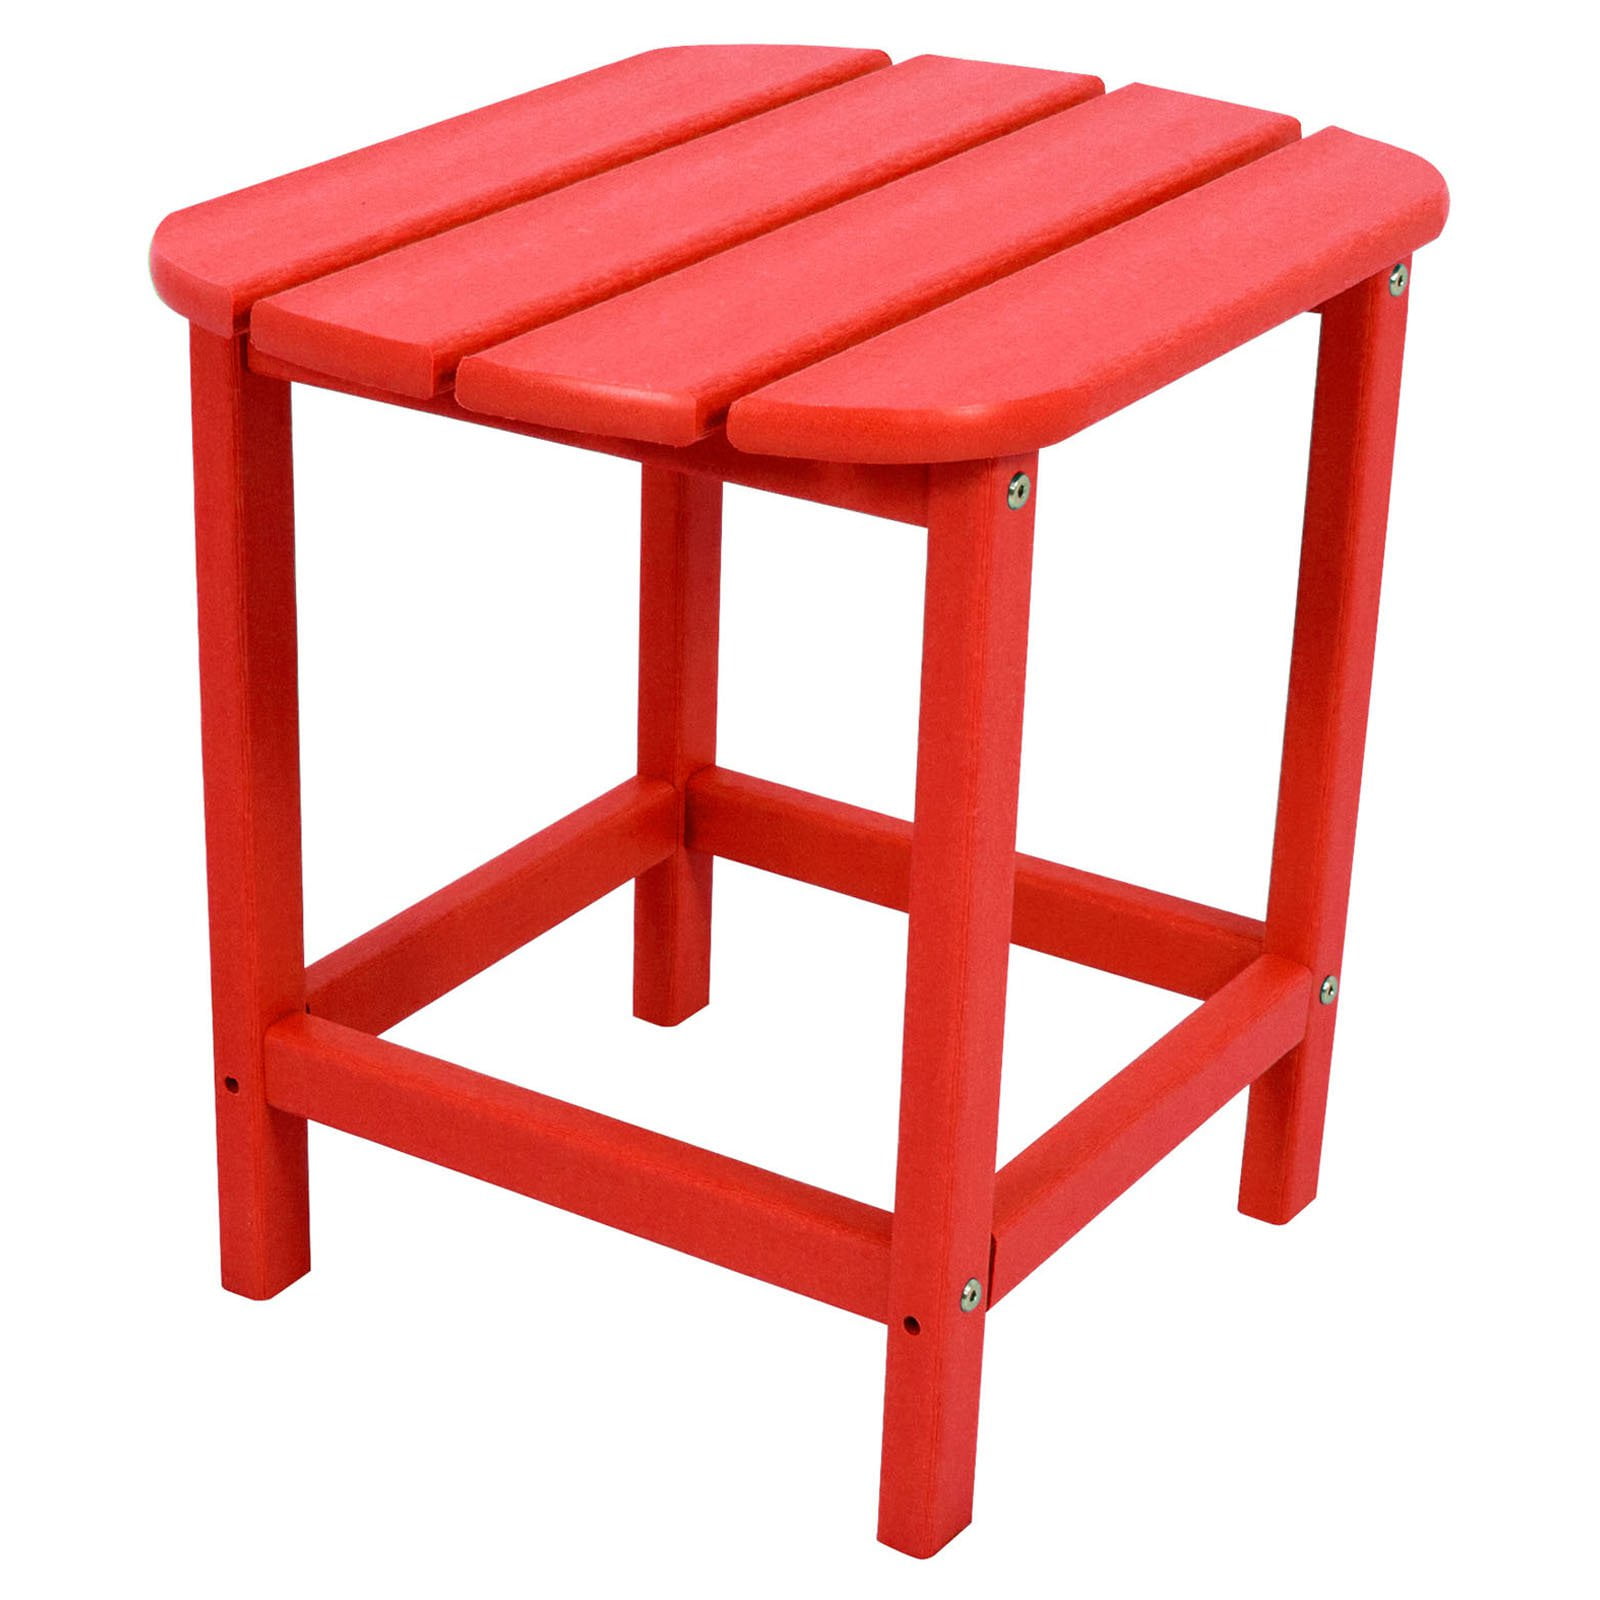 CR Plastic Generations Patio Side Table in Red